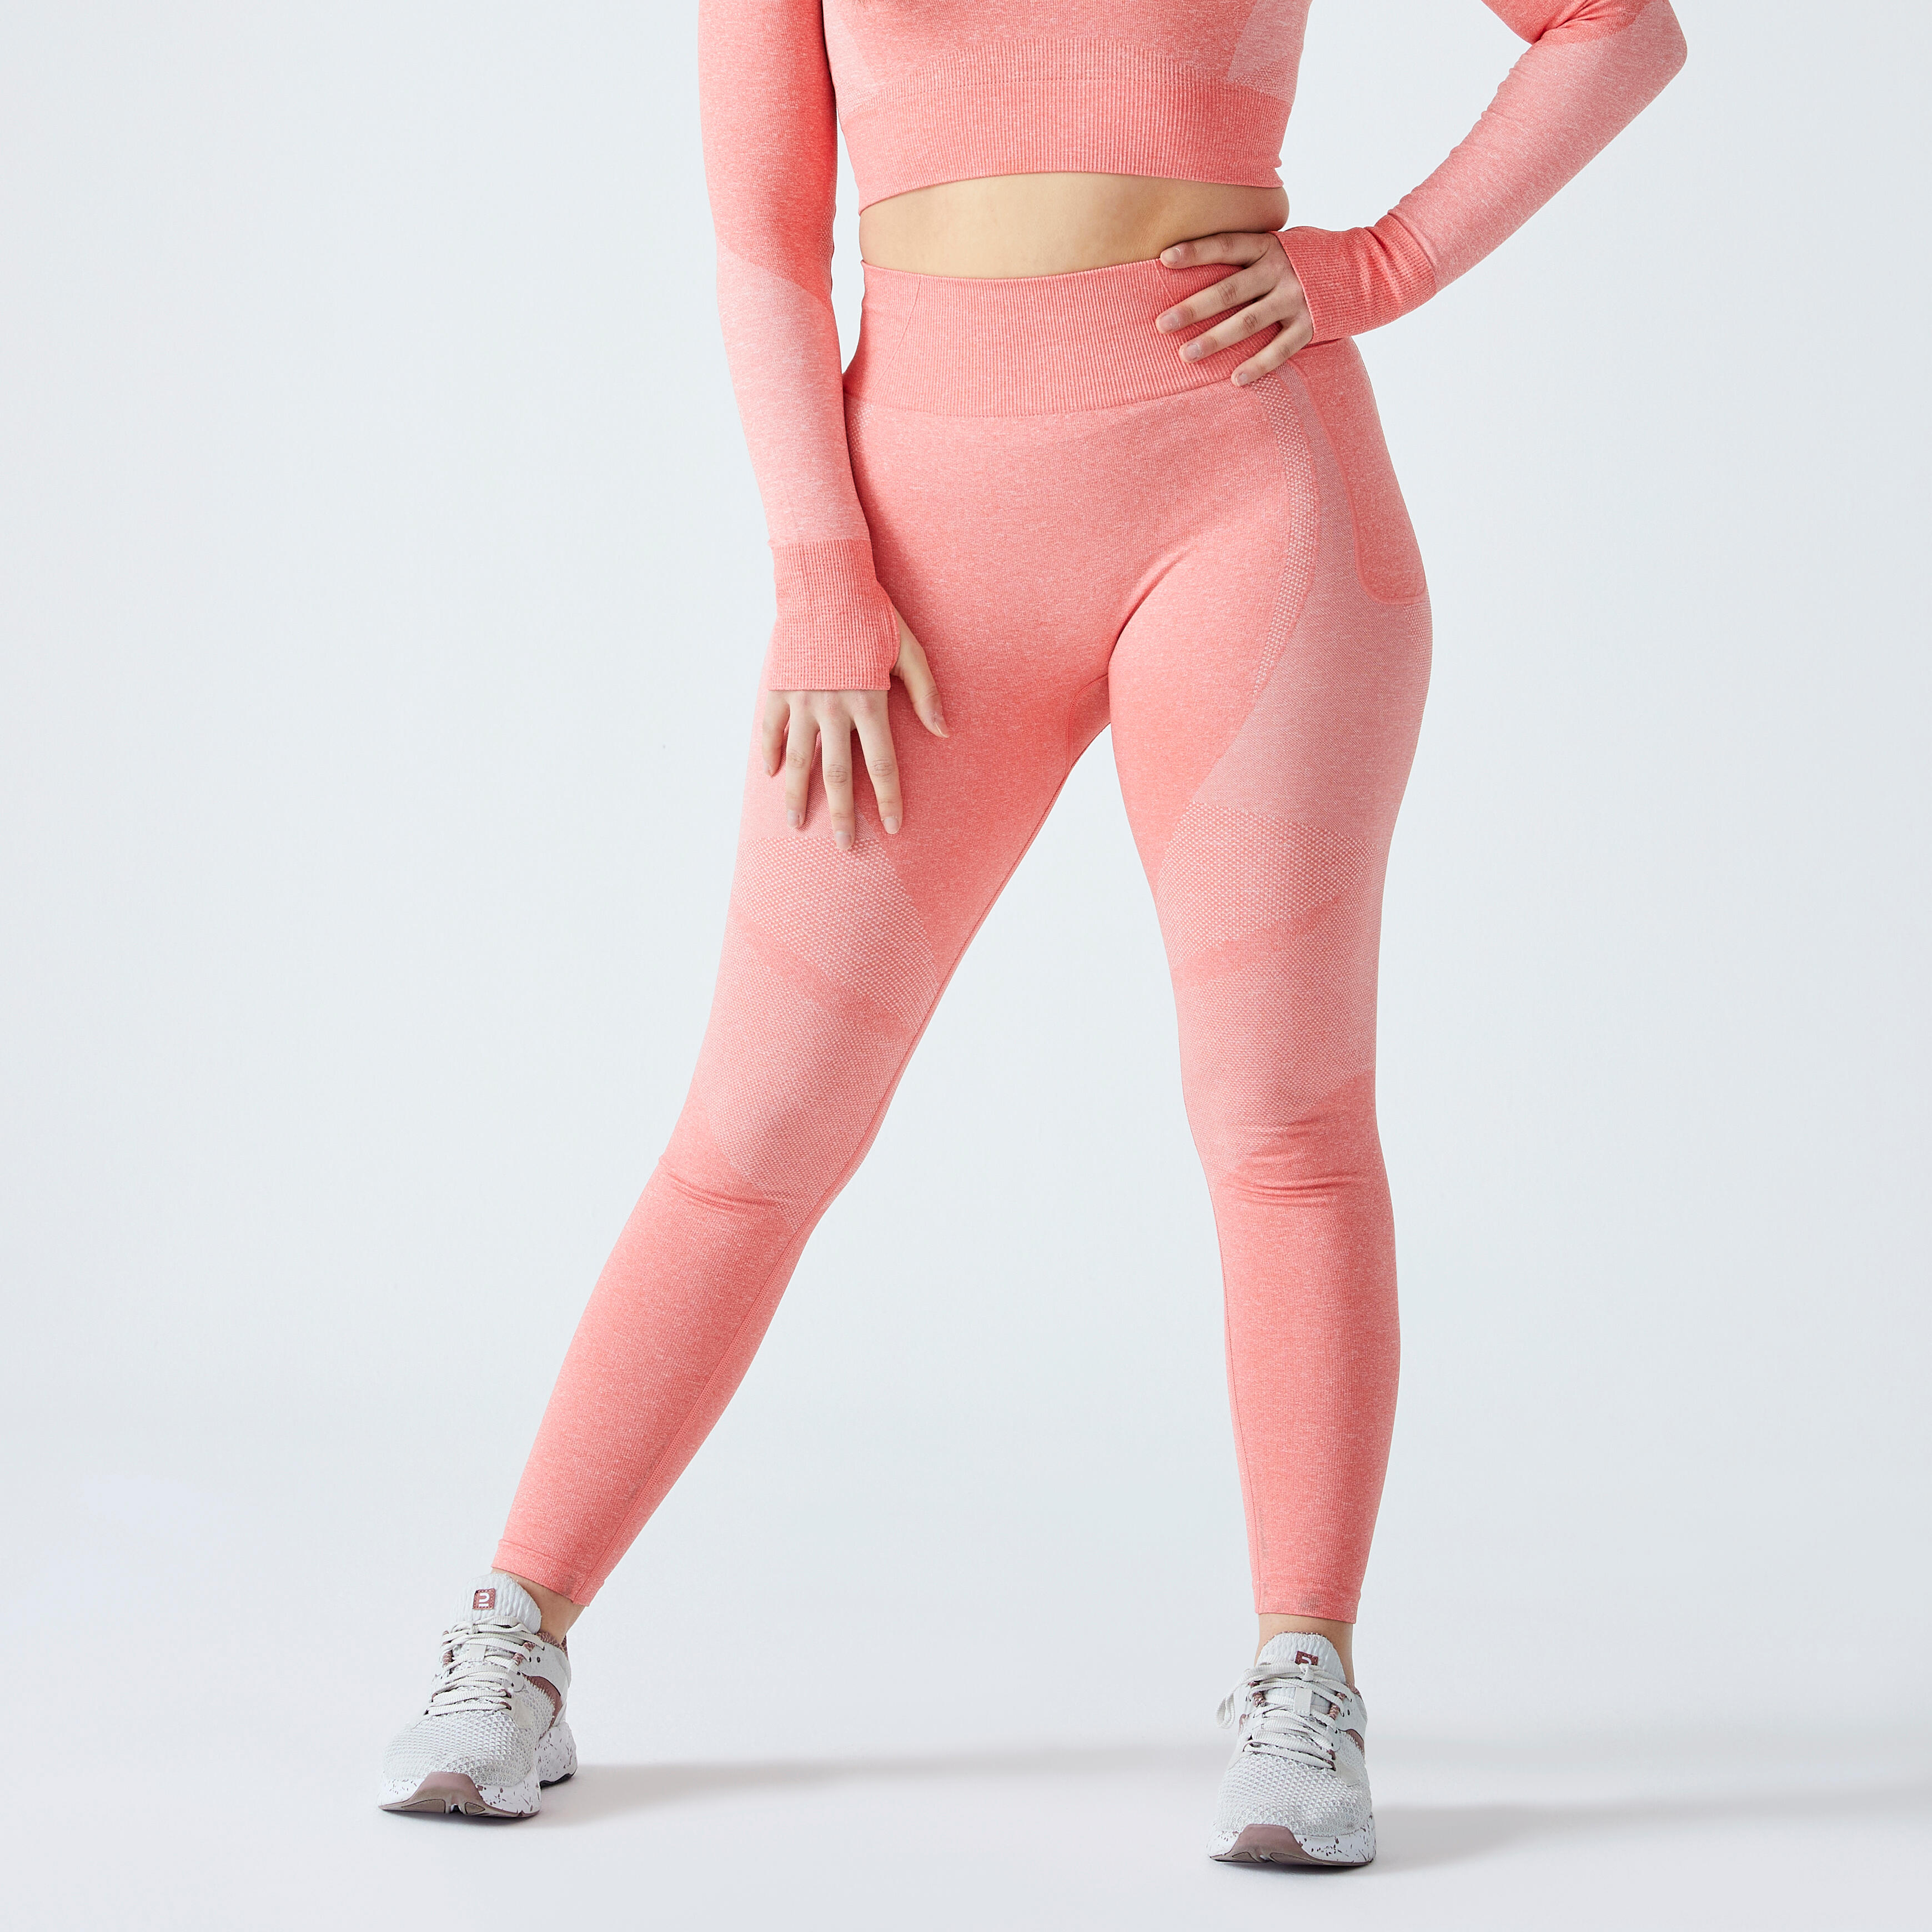 Multicolor High Waist Nylon Sports Leggings, Slim Fit, Strechable at Rs 600  in Sonipat